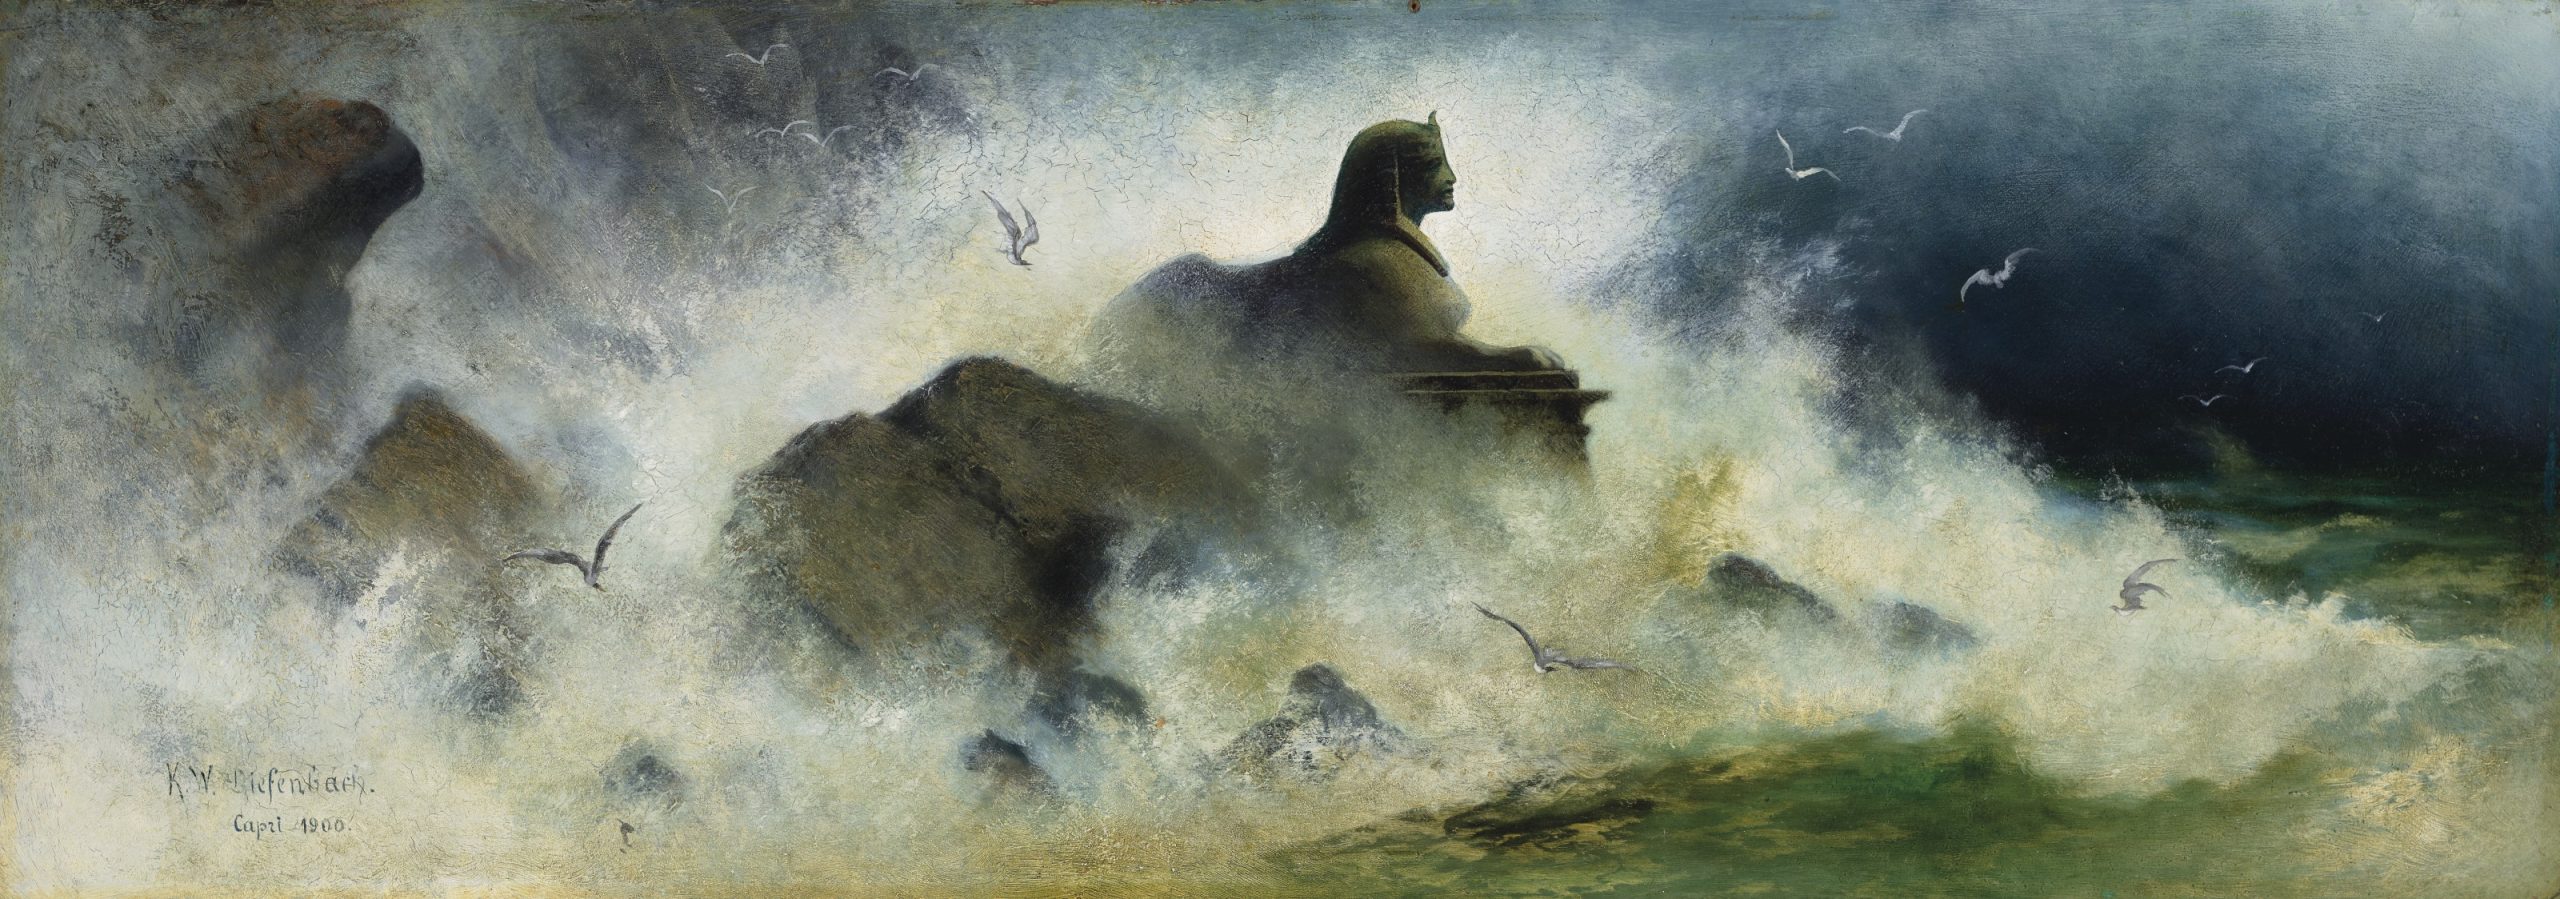 A sphinx looks towards a windy sea while birds fly around the water and rocks.